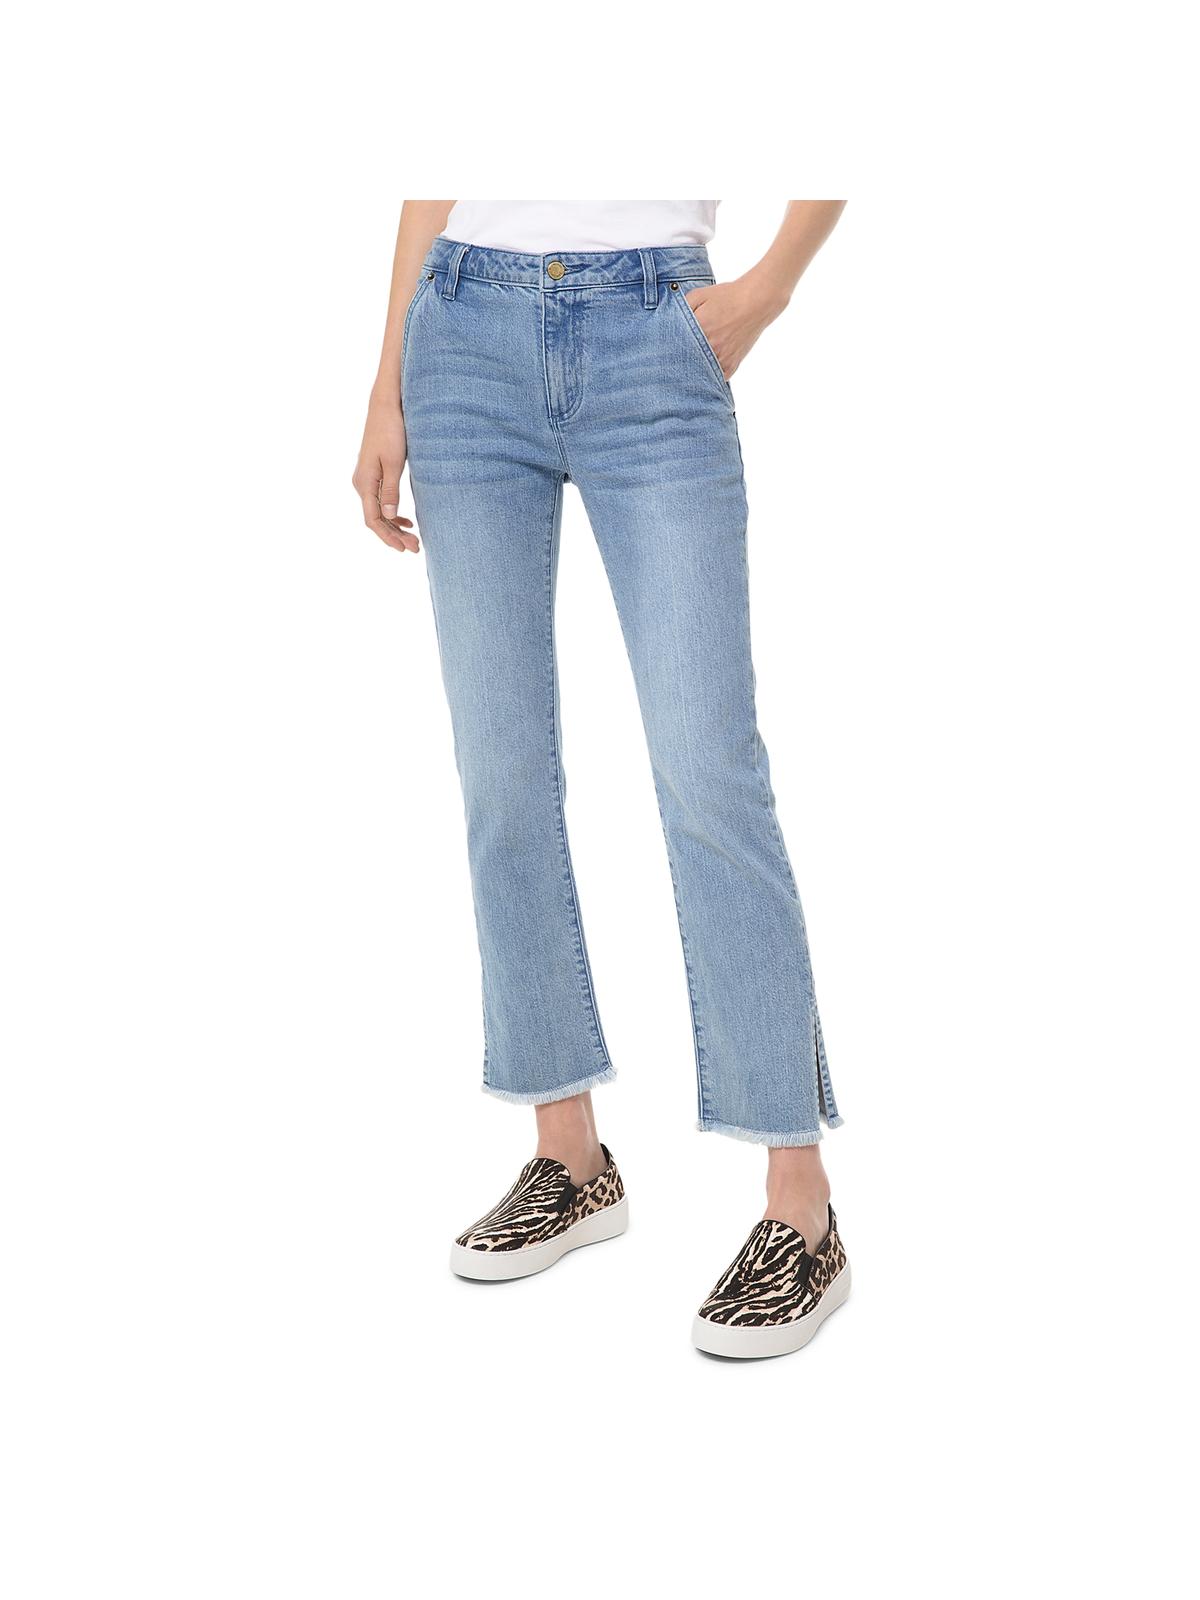 MICHAEL Michael Kors Womens Denim High Rise Cropped Jeans - image 1 of 2